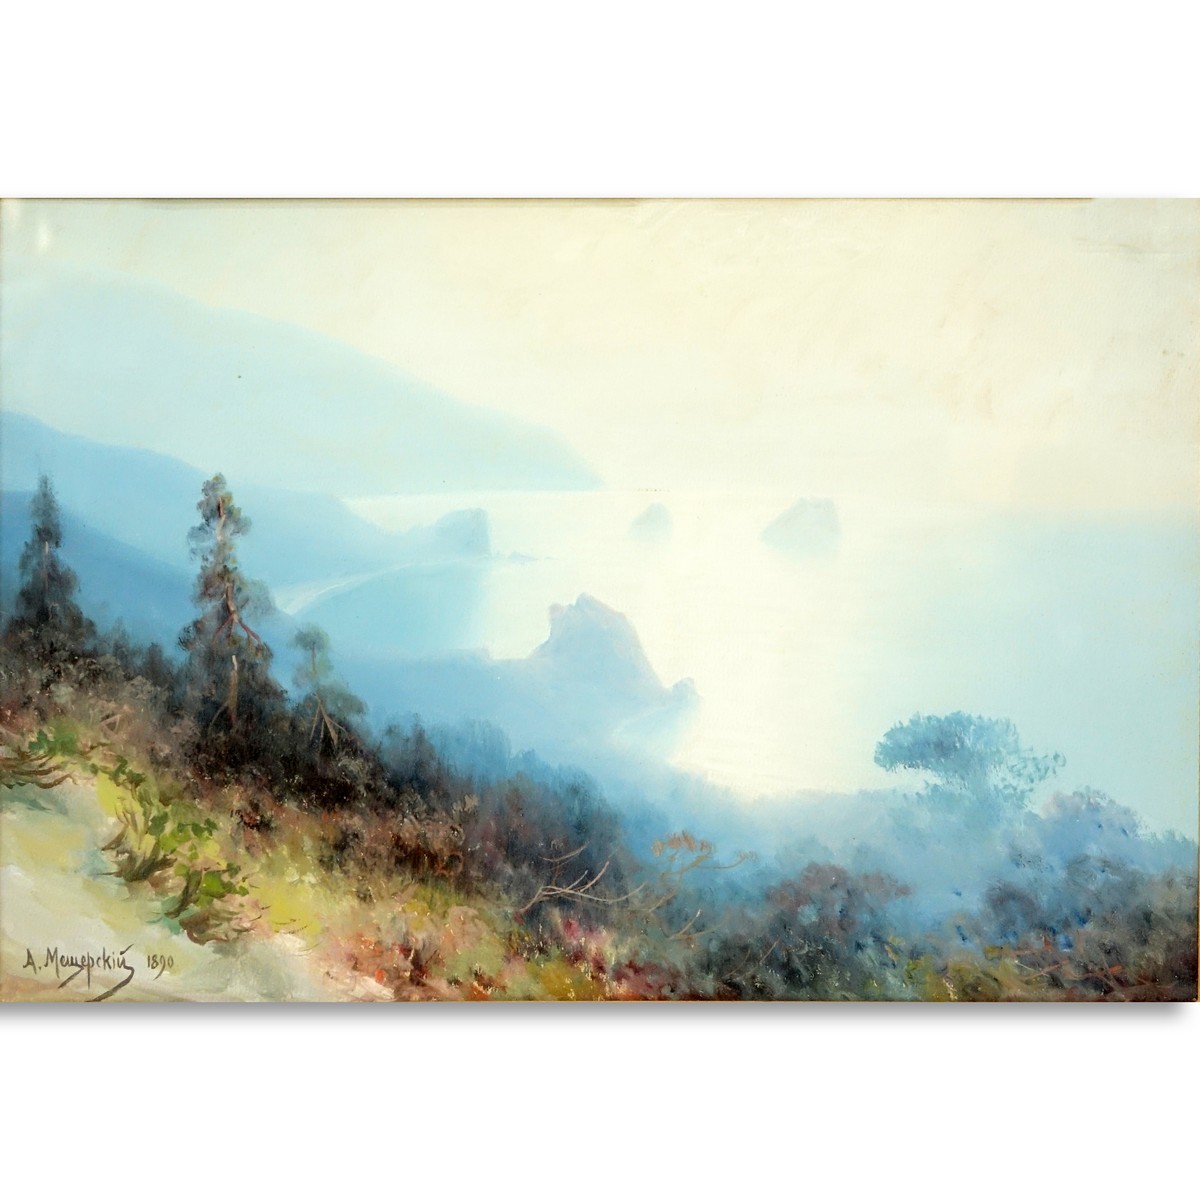 Arsenii Ivanovich Meschersky, Russian (1834 - 1902) Watercolor on paper "Mountain Shoreline" Signed dated 1890 lower left. Minor stains or in good condition.